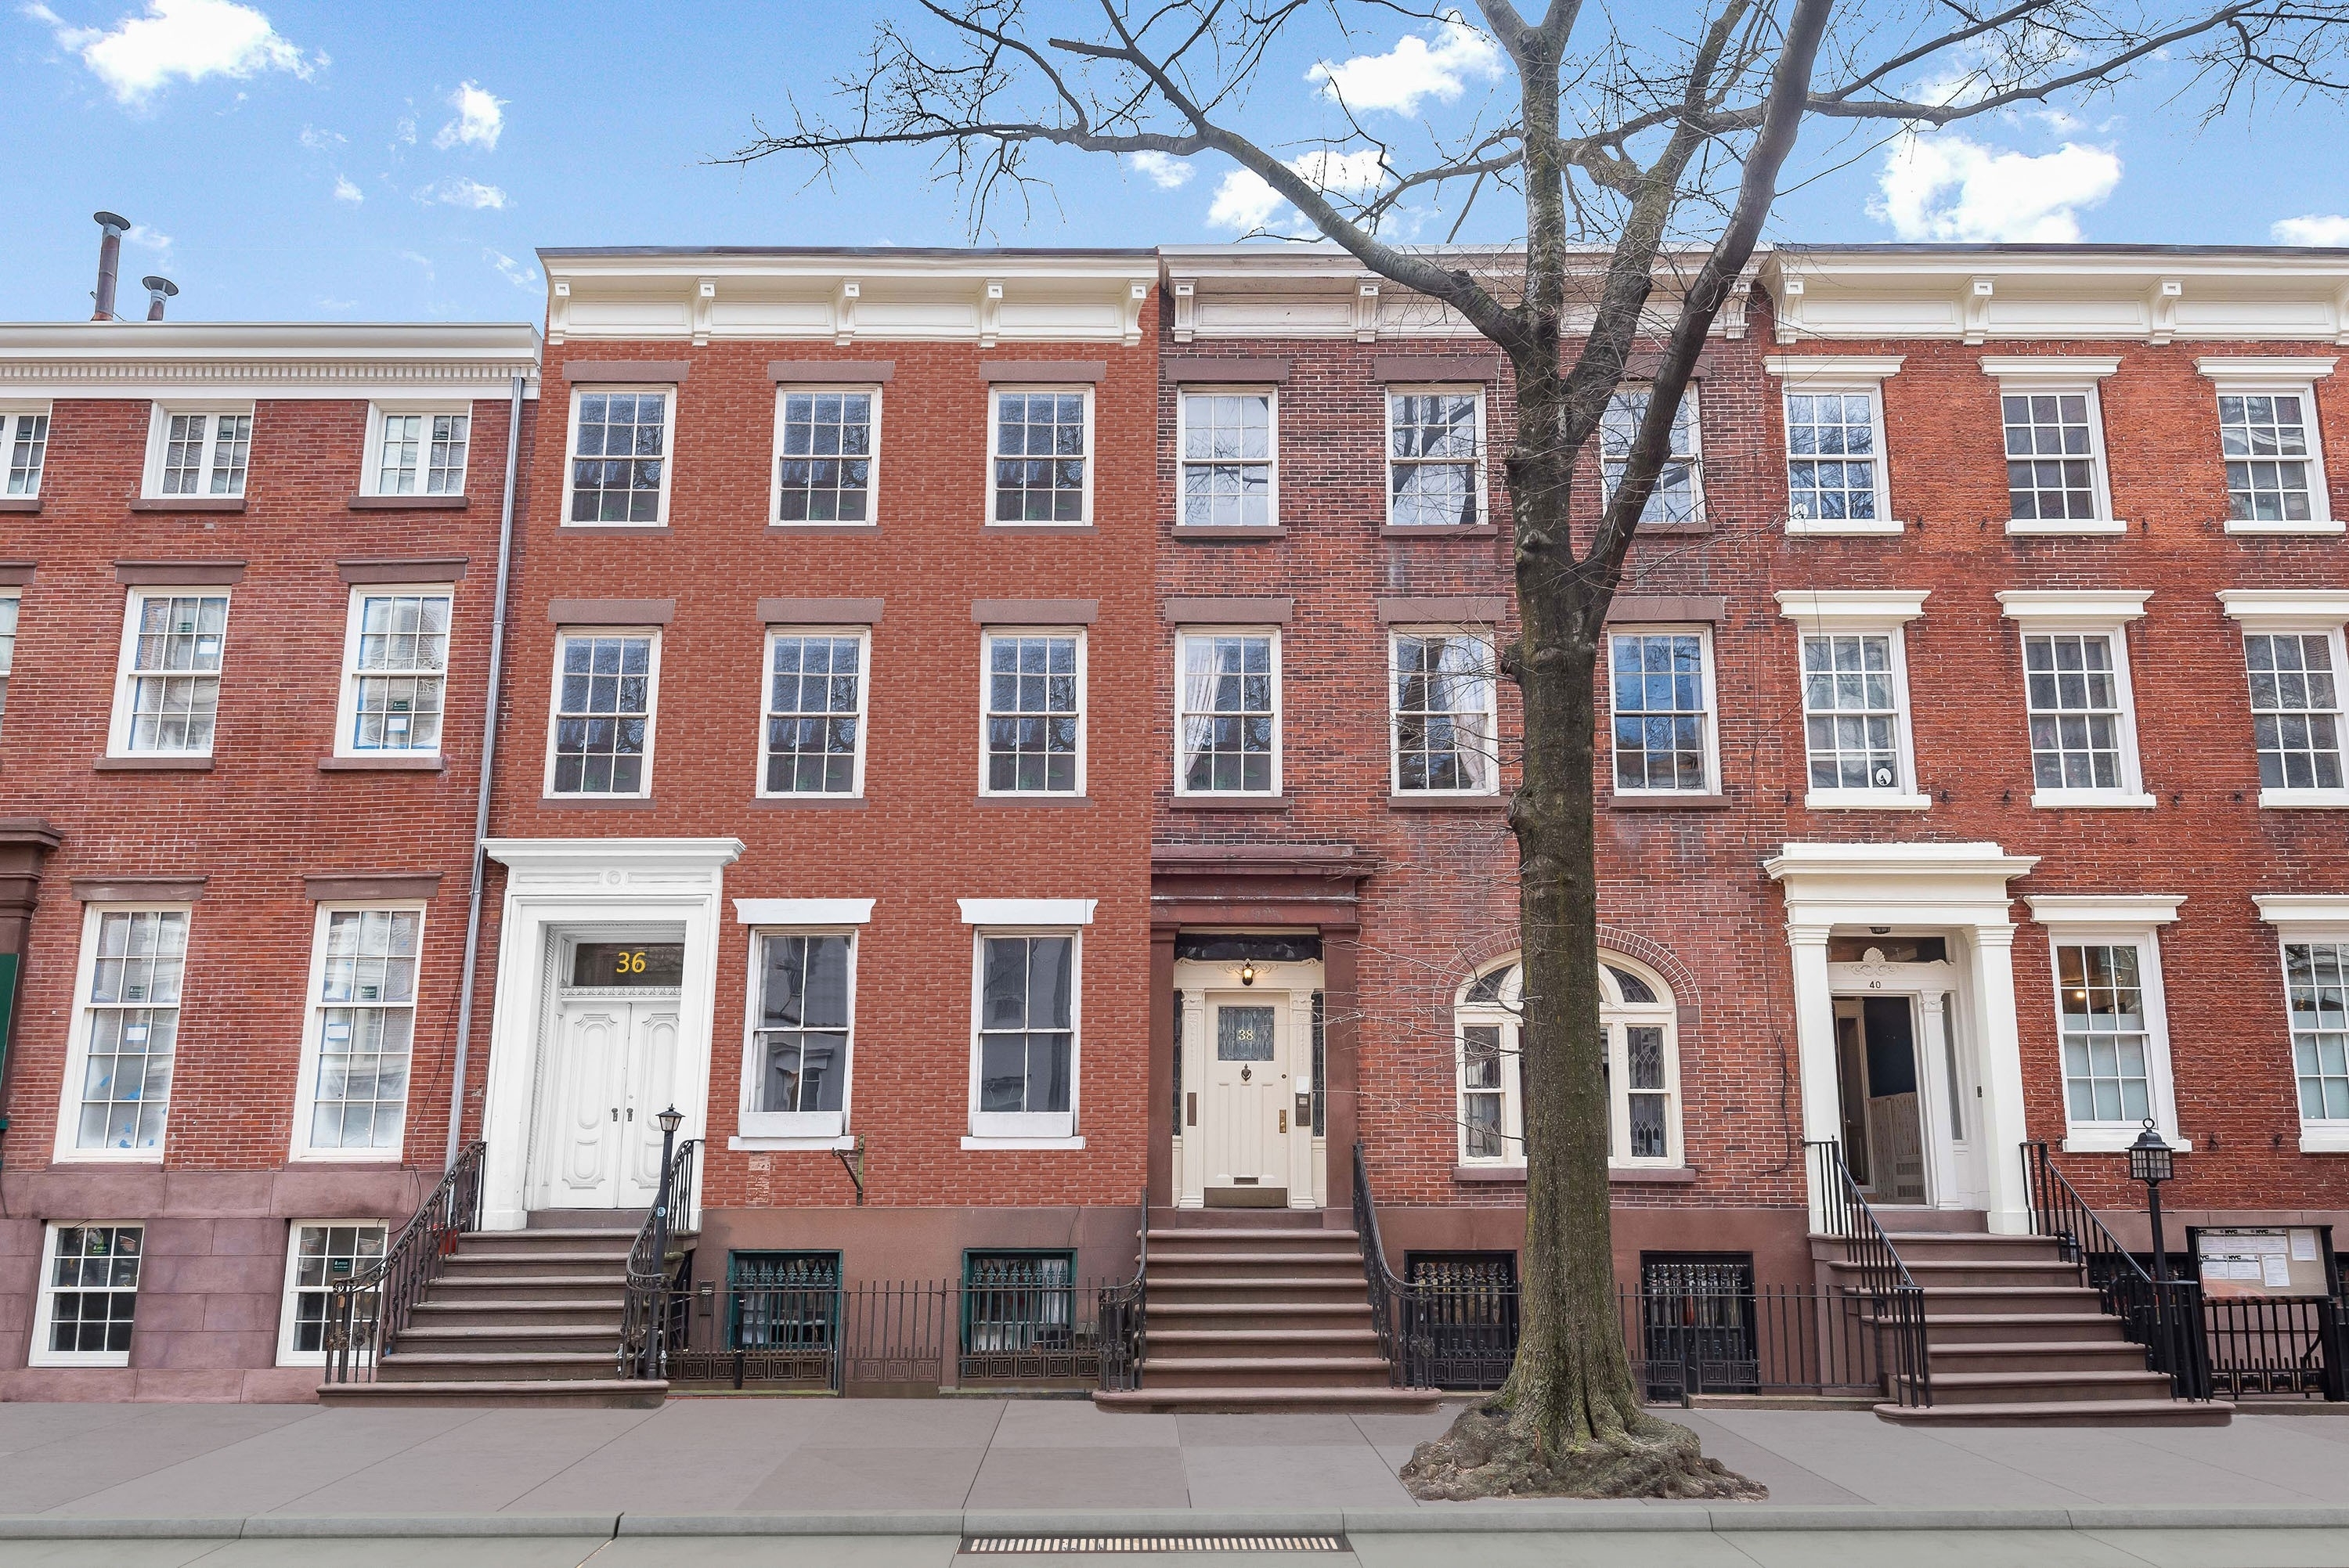 Property at 36 W 11TH ST, TOWNHOUSE Greenwich Village, New York, New York 10011